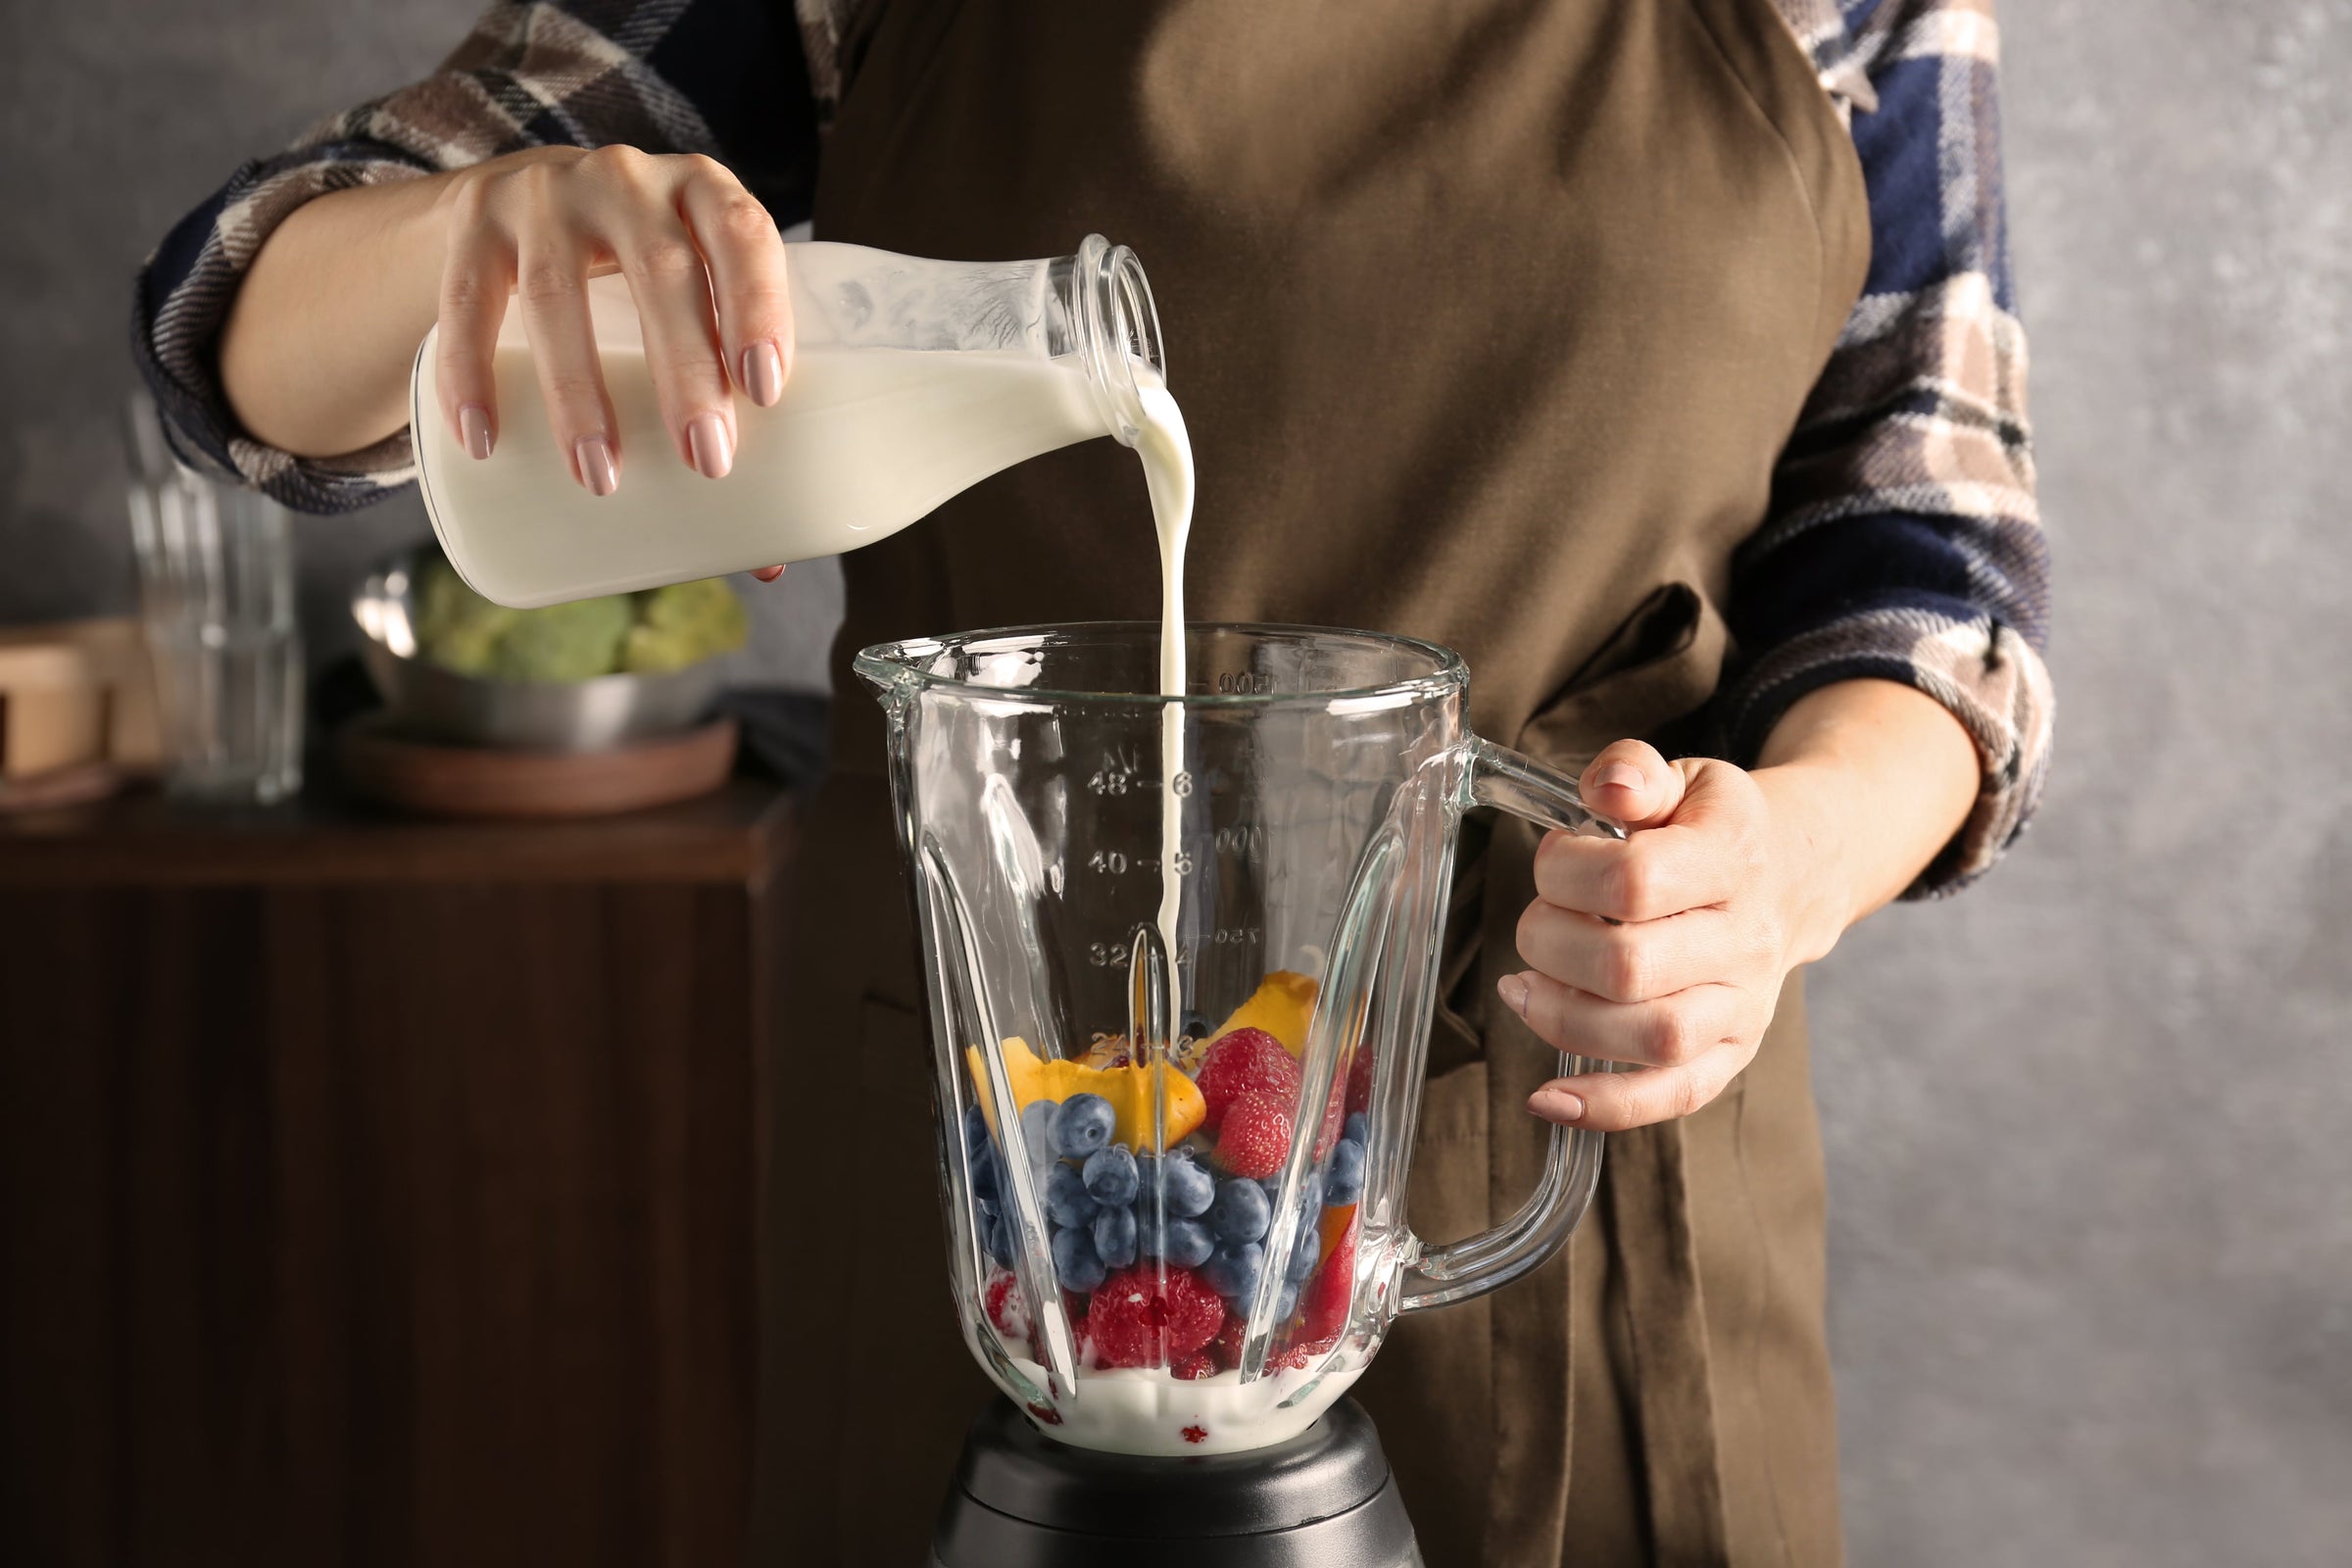 Woman pouring nano-hydrolyzed liquid collagen, one of the supplements to help lose weight, into a blender filled with colorful fruits